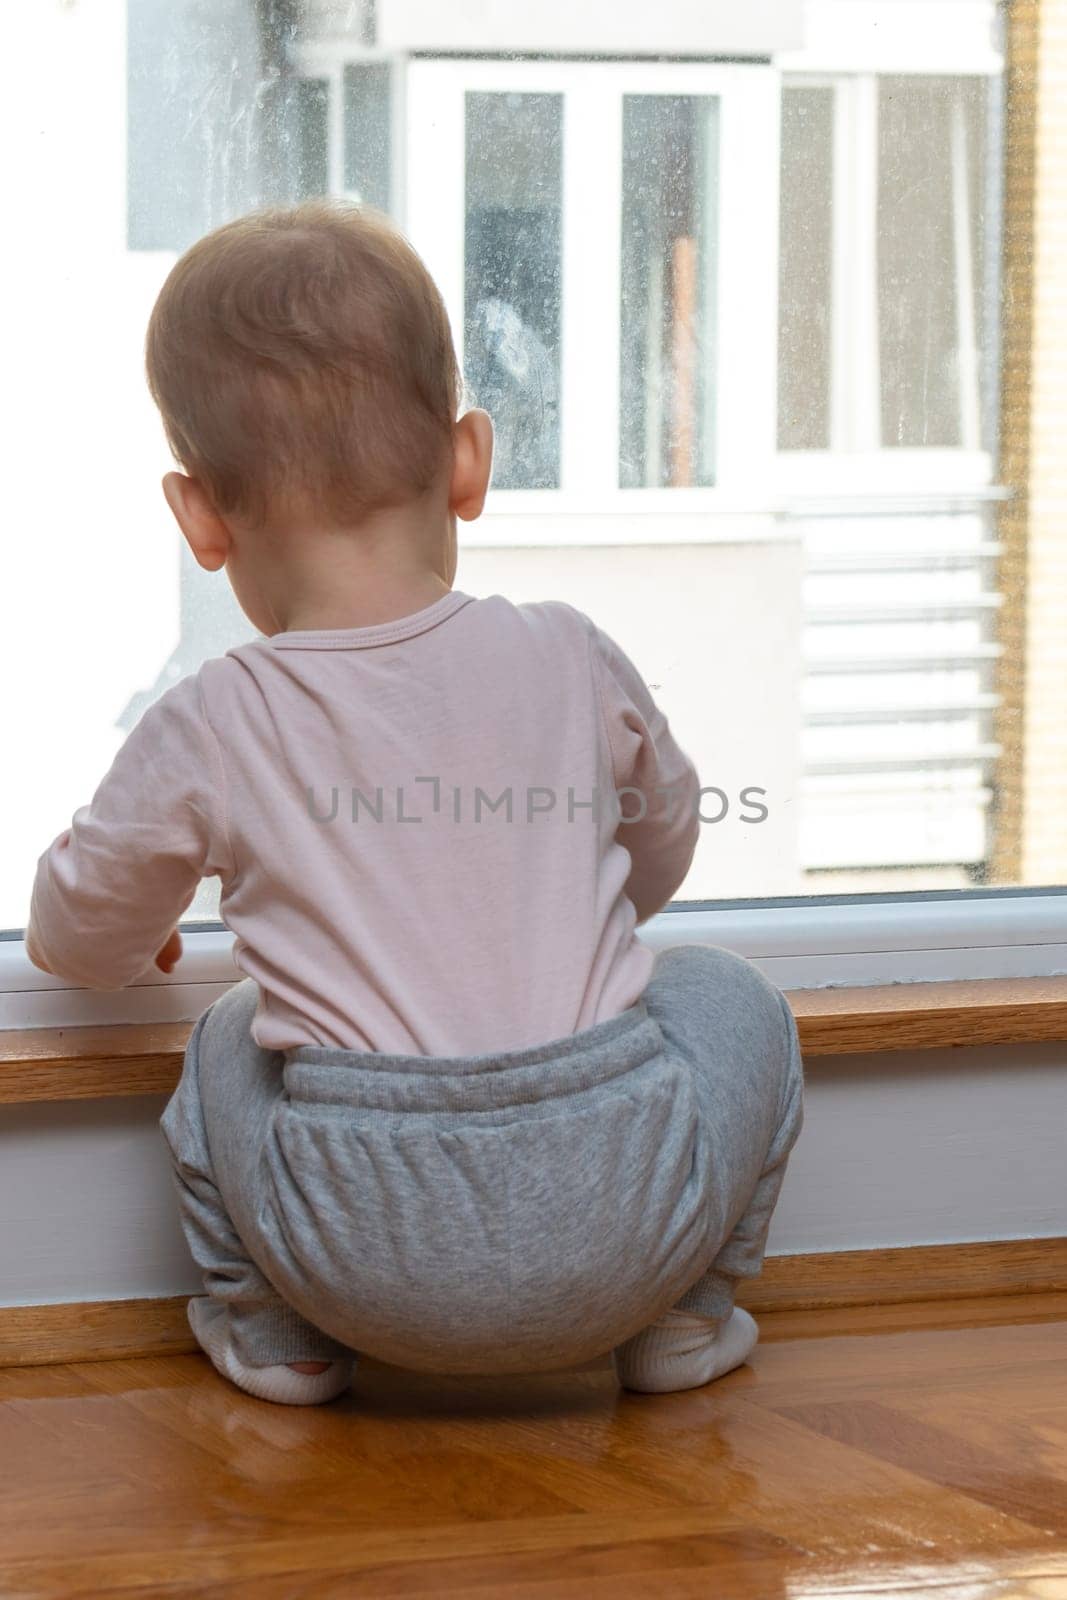 A toddler in a house looks out the window at a nearby building, dreaming of going outside for fun. Concept of a kid wanting to leave home for a walk